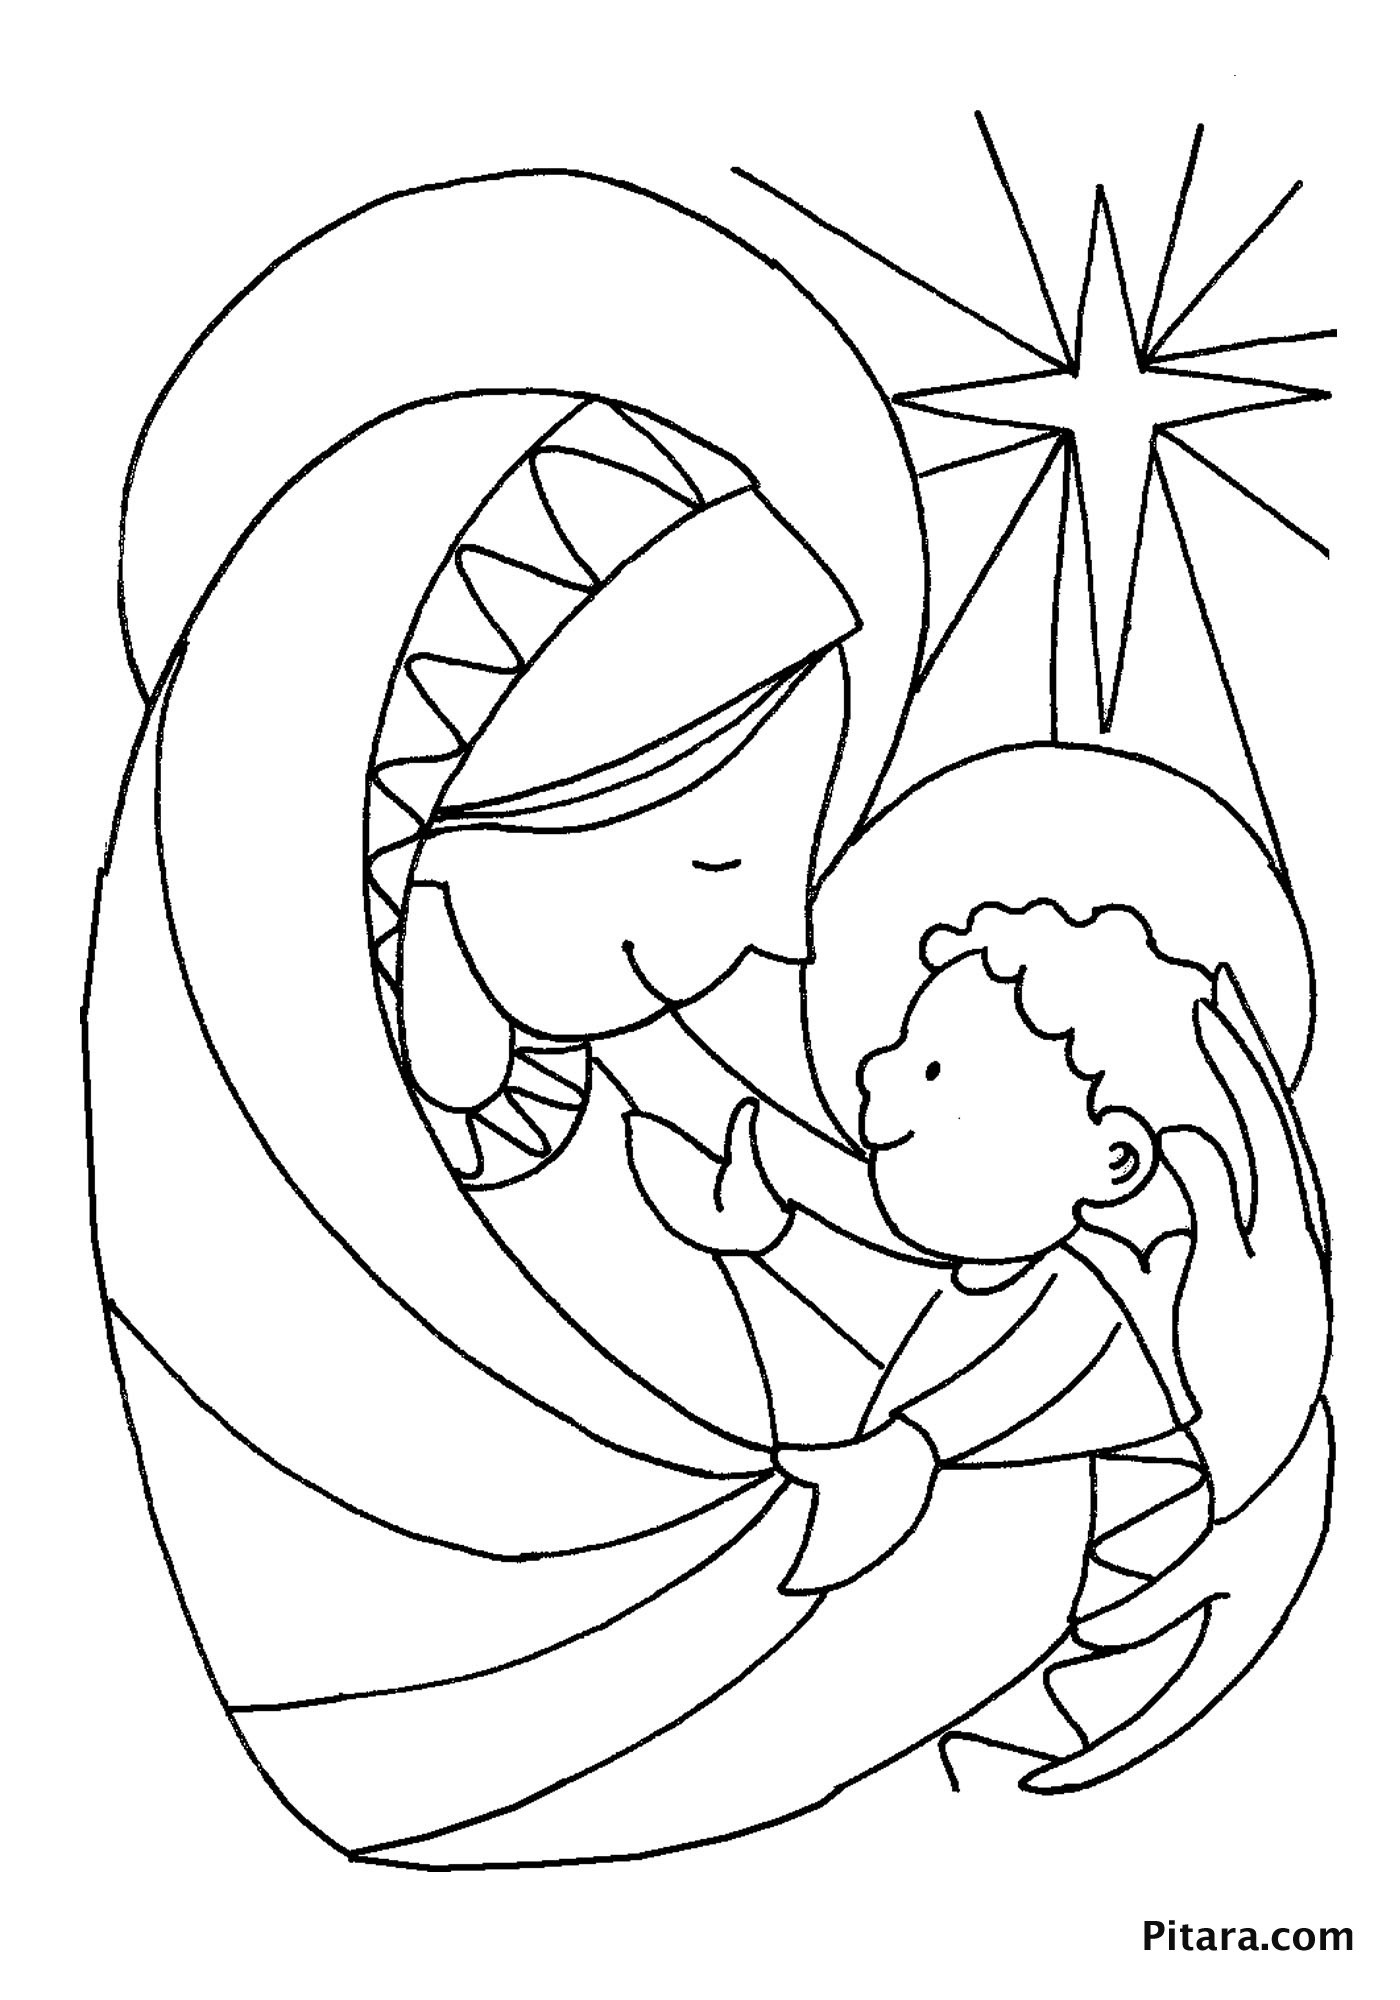 Baby Jesus Coloring Page
 Mary & baby Jesus – Coloring page